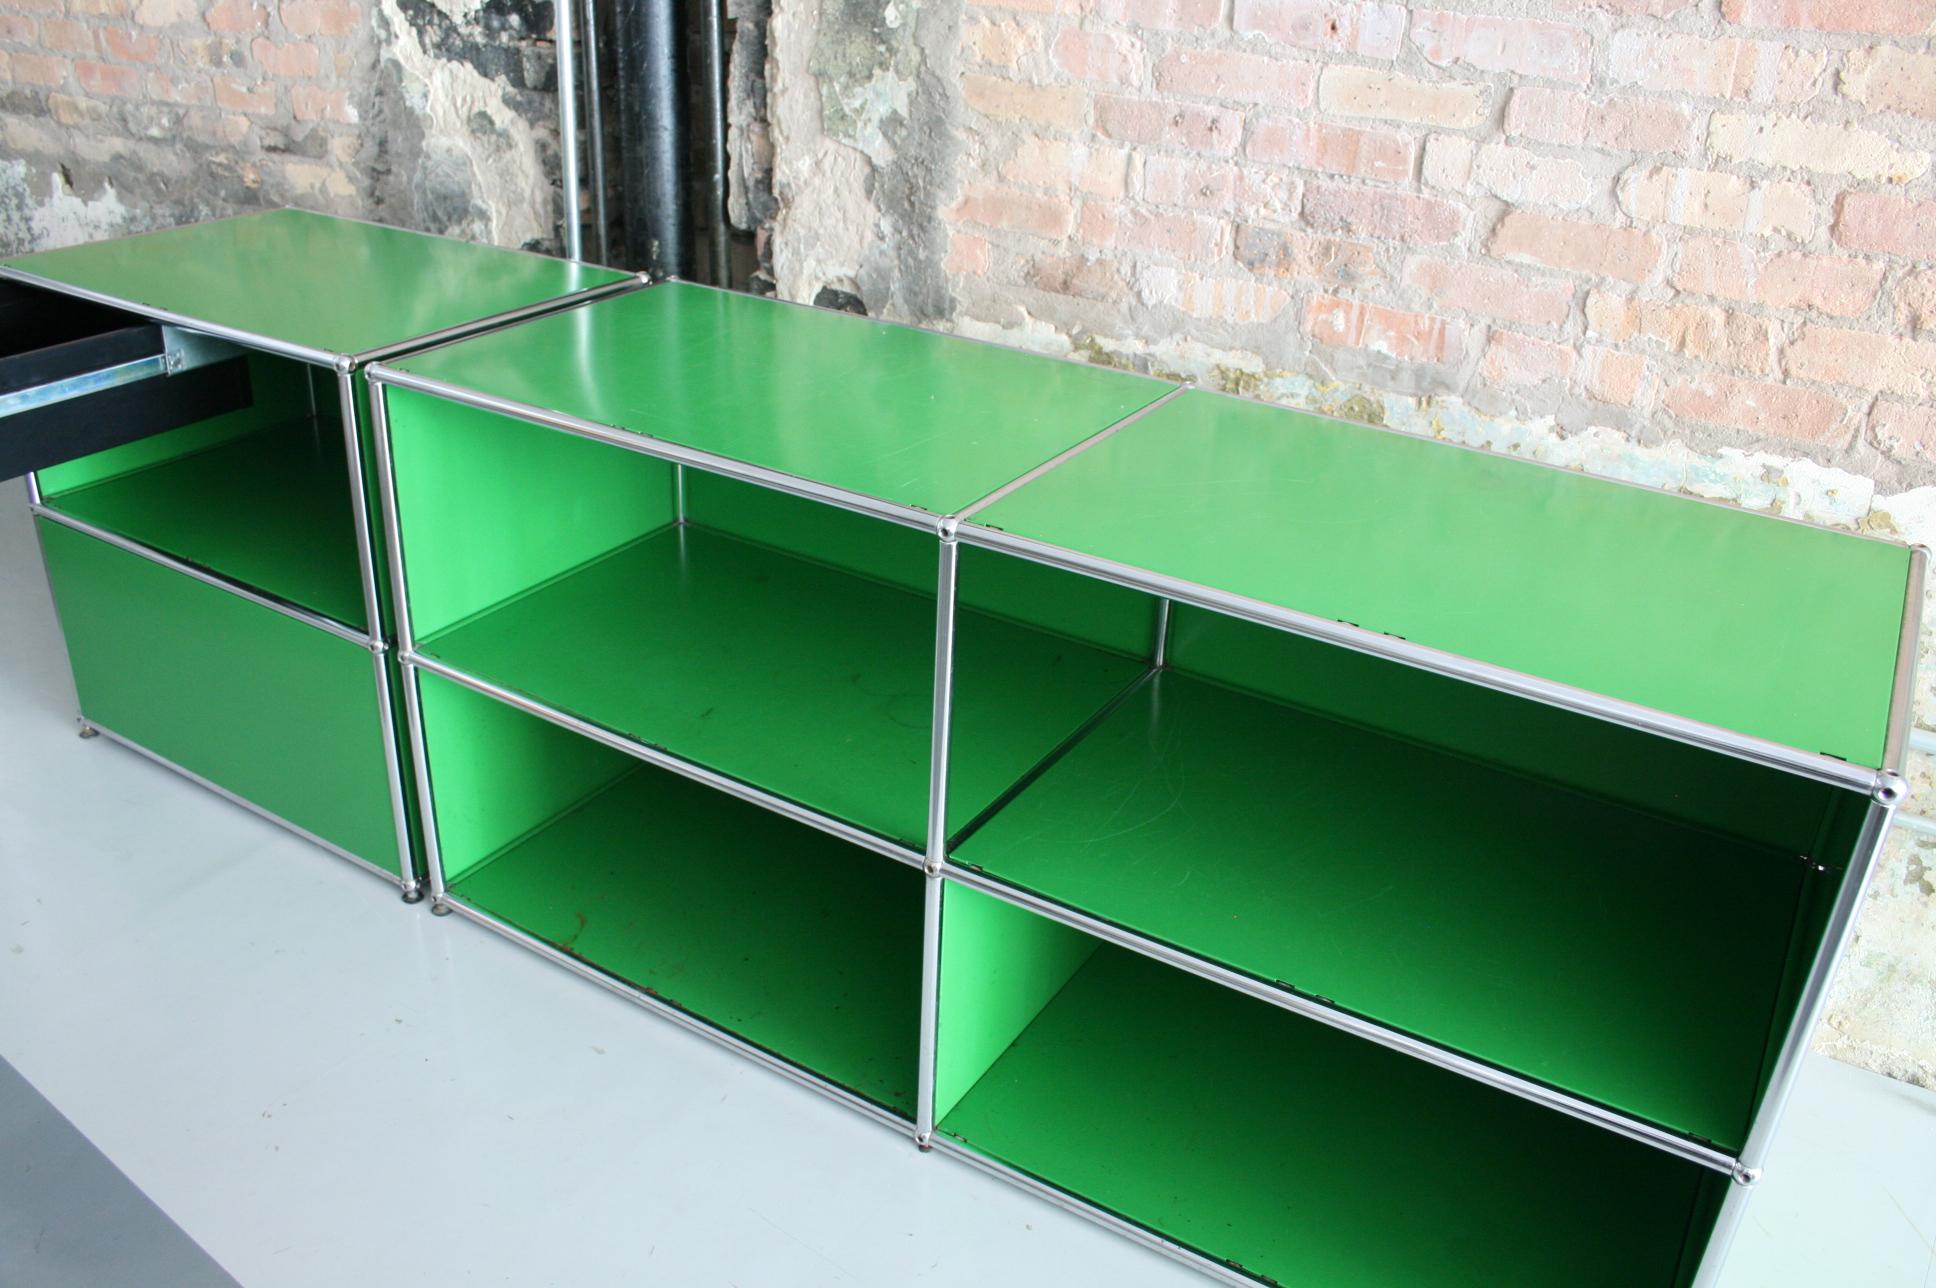 Mid-20th Century Pair of Metal Modular Cabinets by USM Haller in Green by Fritz Haller